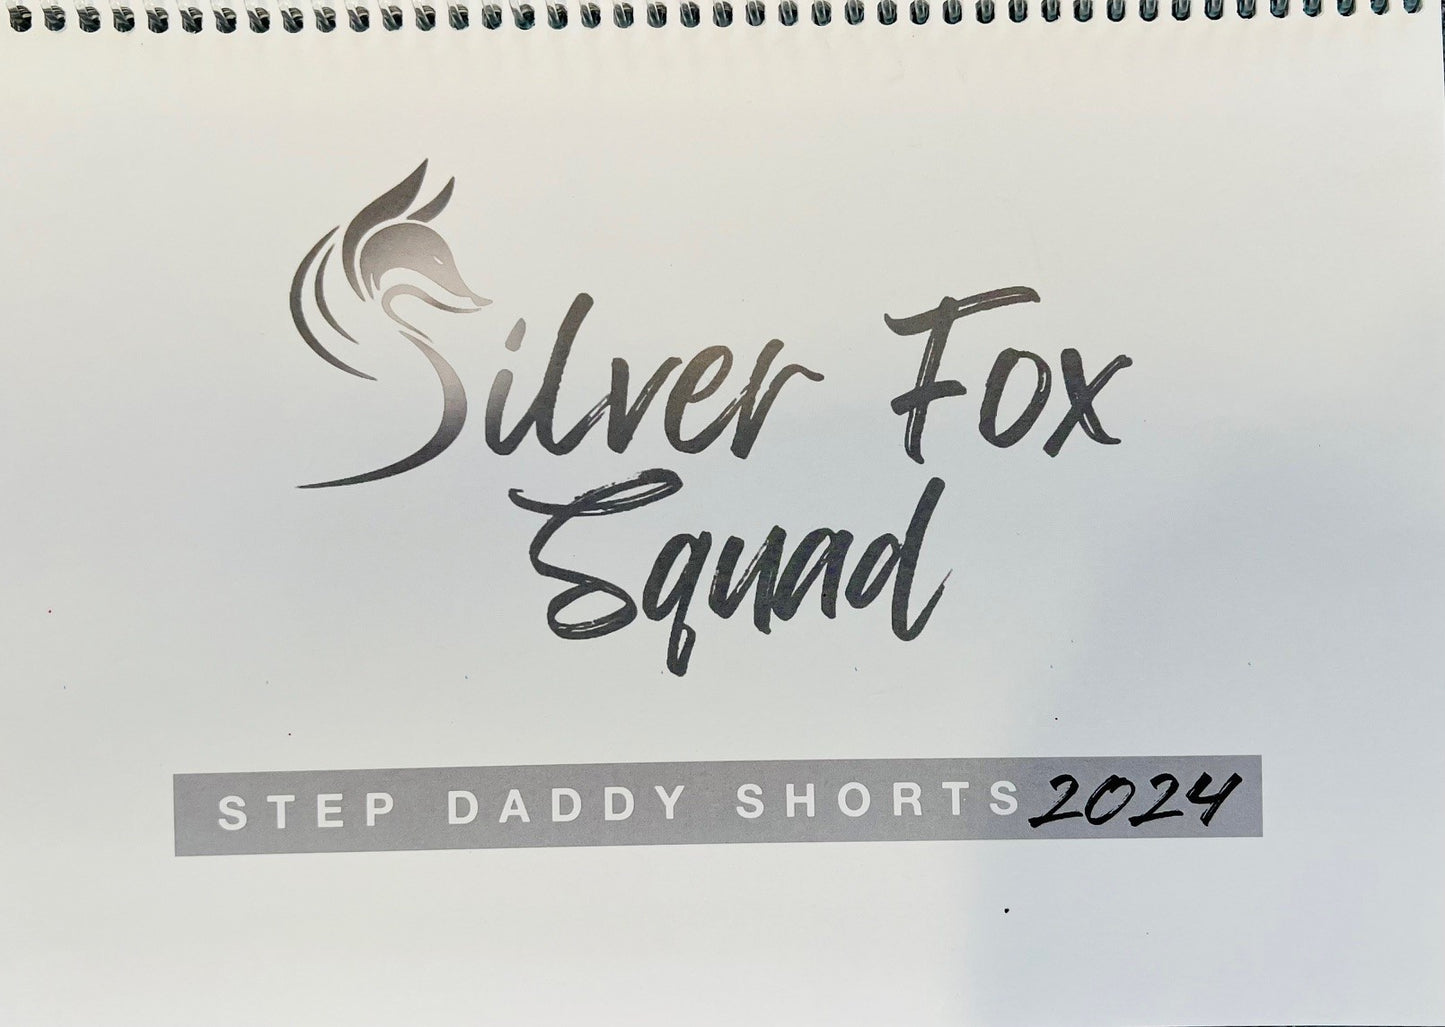 12 month calendar with all The Silverfox Squad LLC members